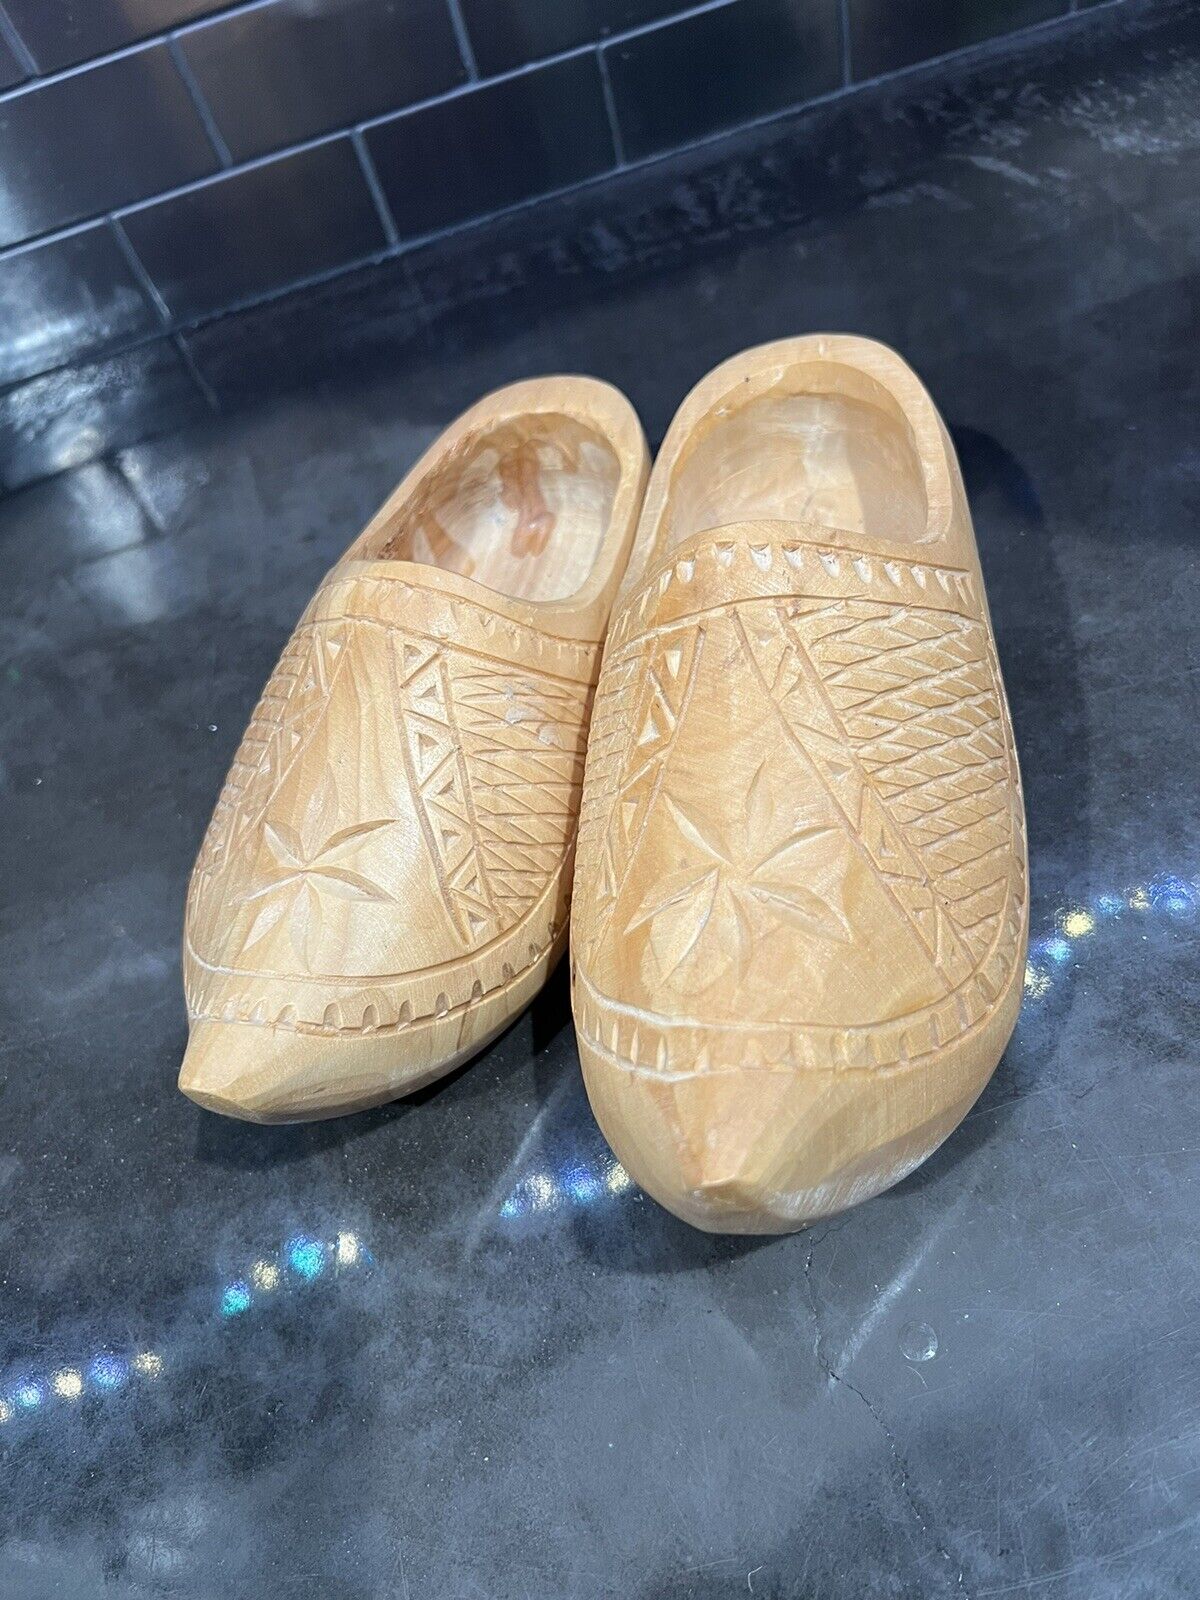 Hand Carved Wooden Clog Dutch Traditional Unpainted Wood Shoes Children’s